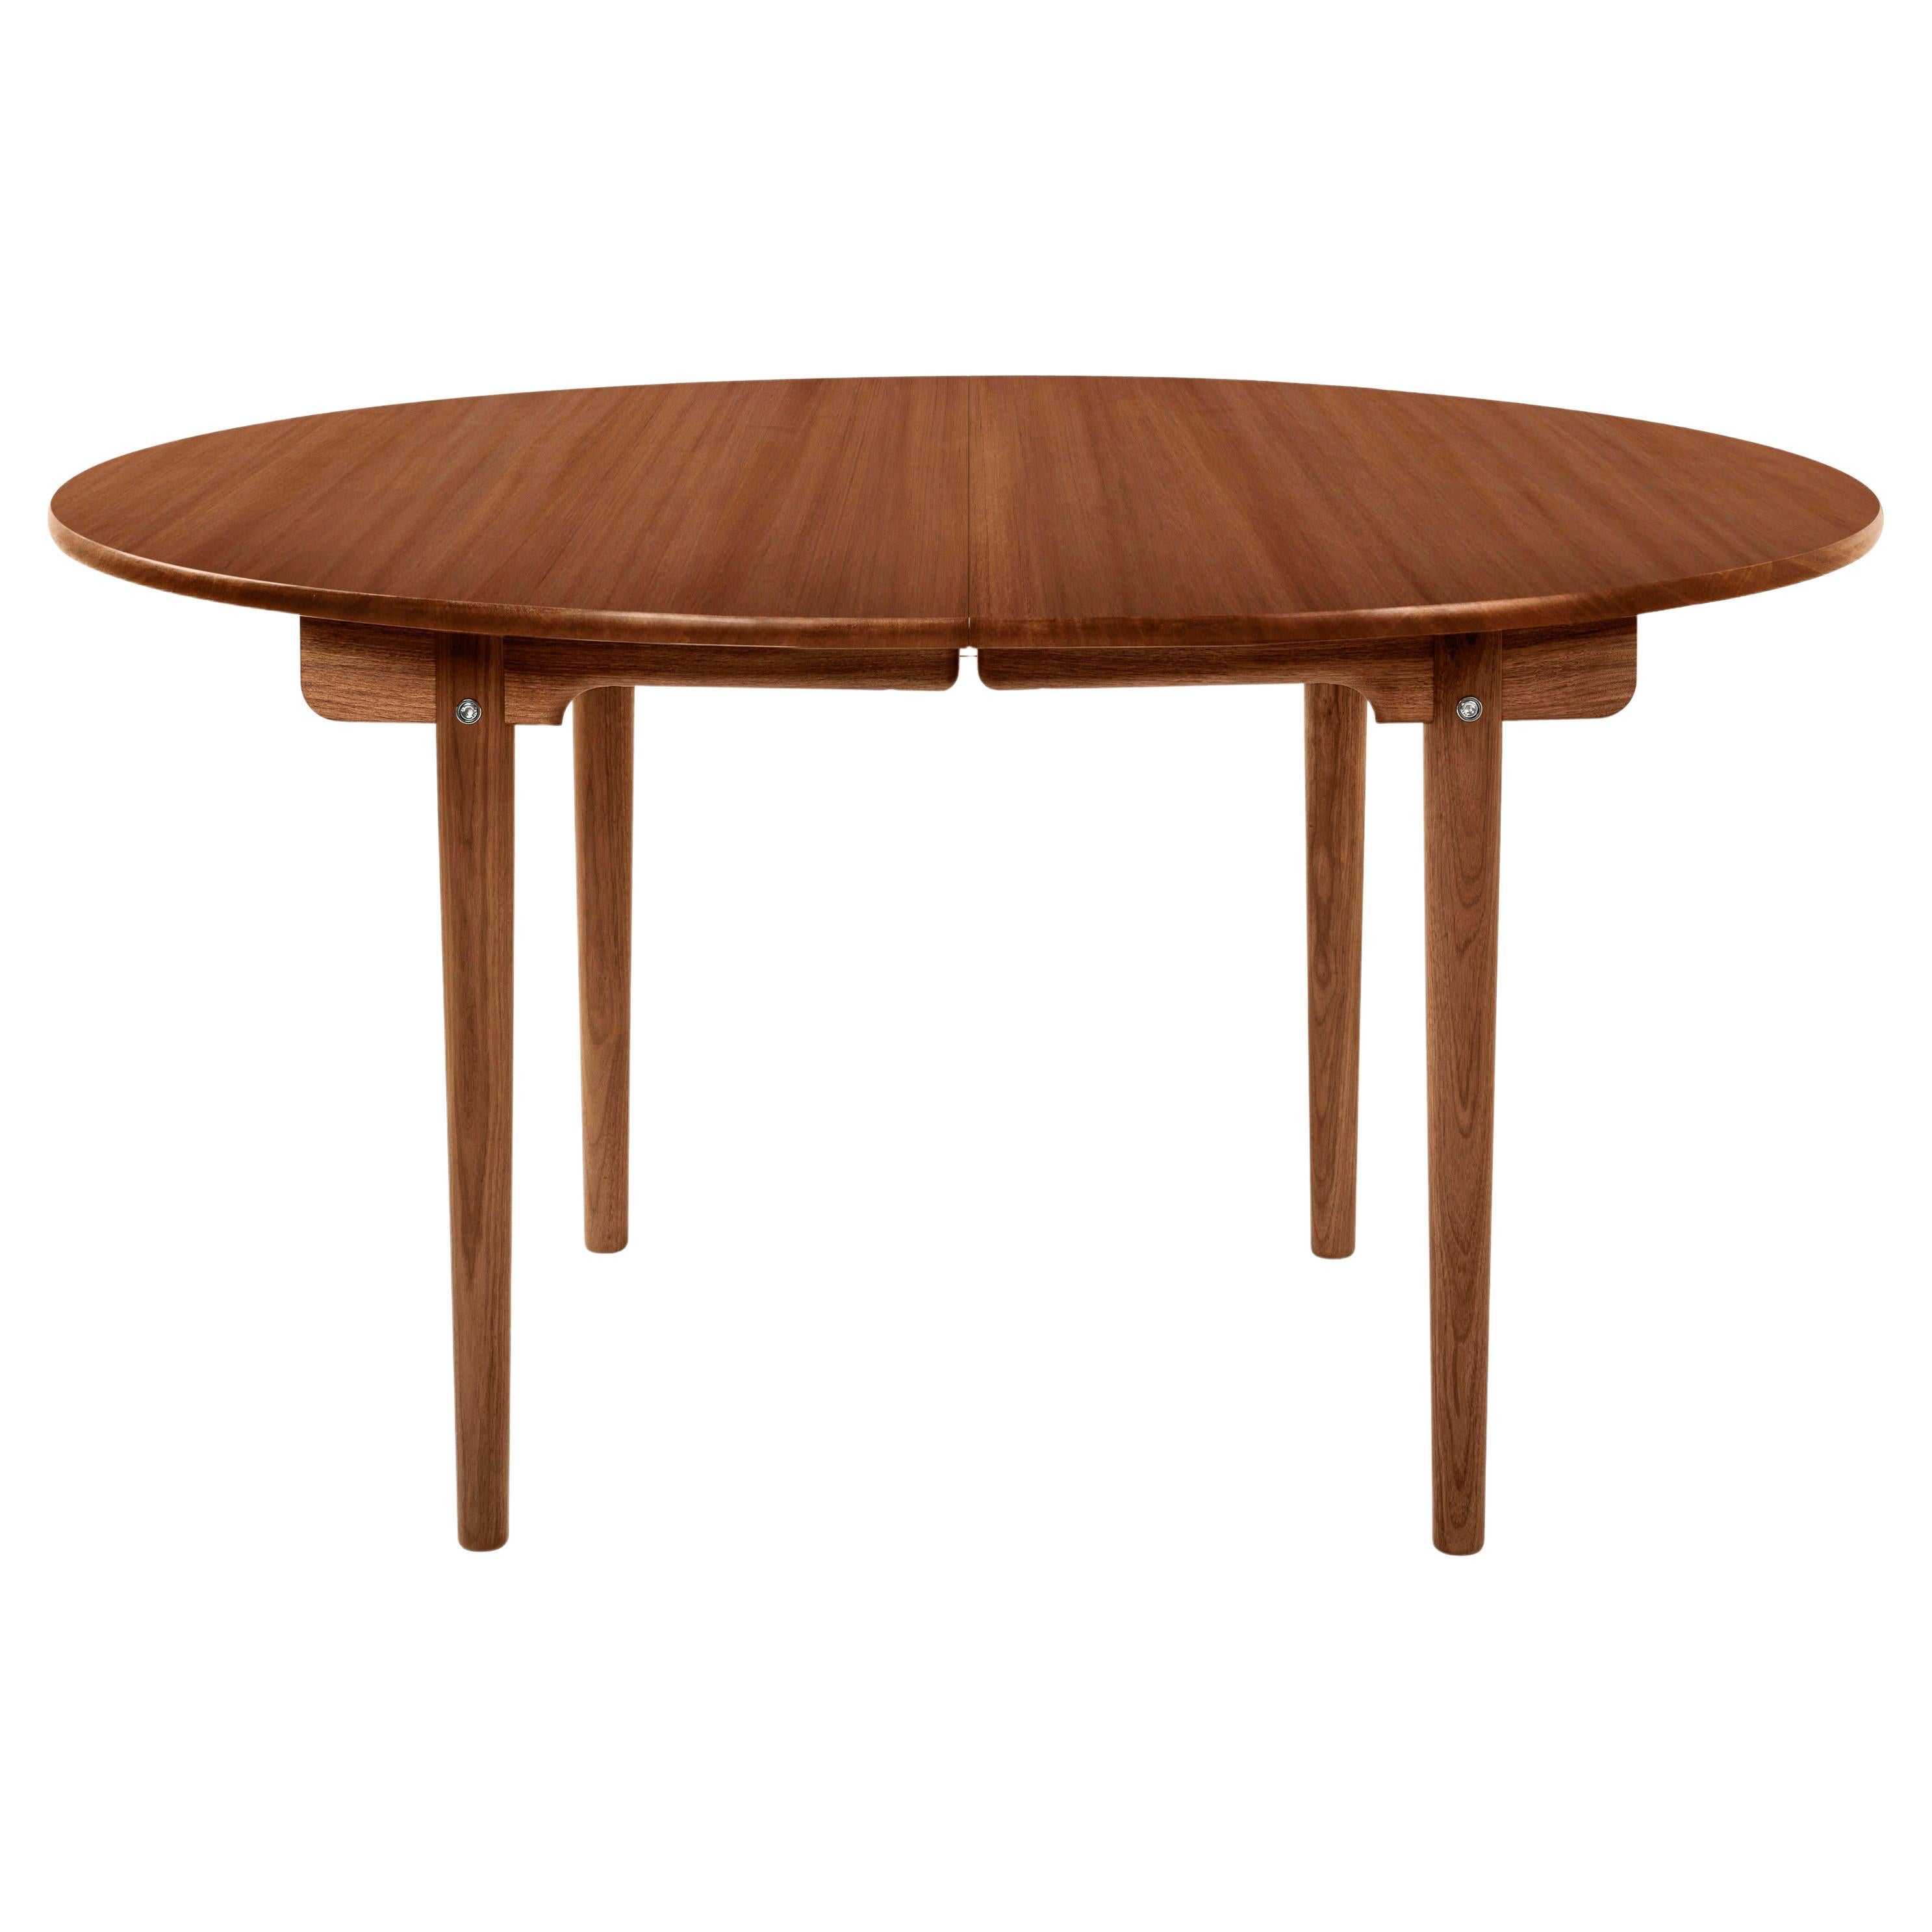 This table is offered in Beech, Oak, Walnut and Mahogany in a variety of wood treatments (Soap, Lacquer, Oil, White Oil, Smoked Oil).  This table can be prepared to accept 2 leaves. Pricing will vary depending on the material and finish. Priced as